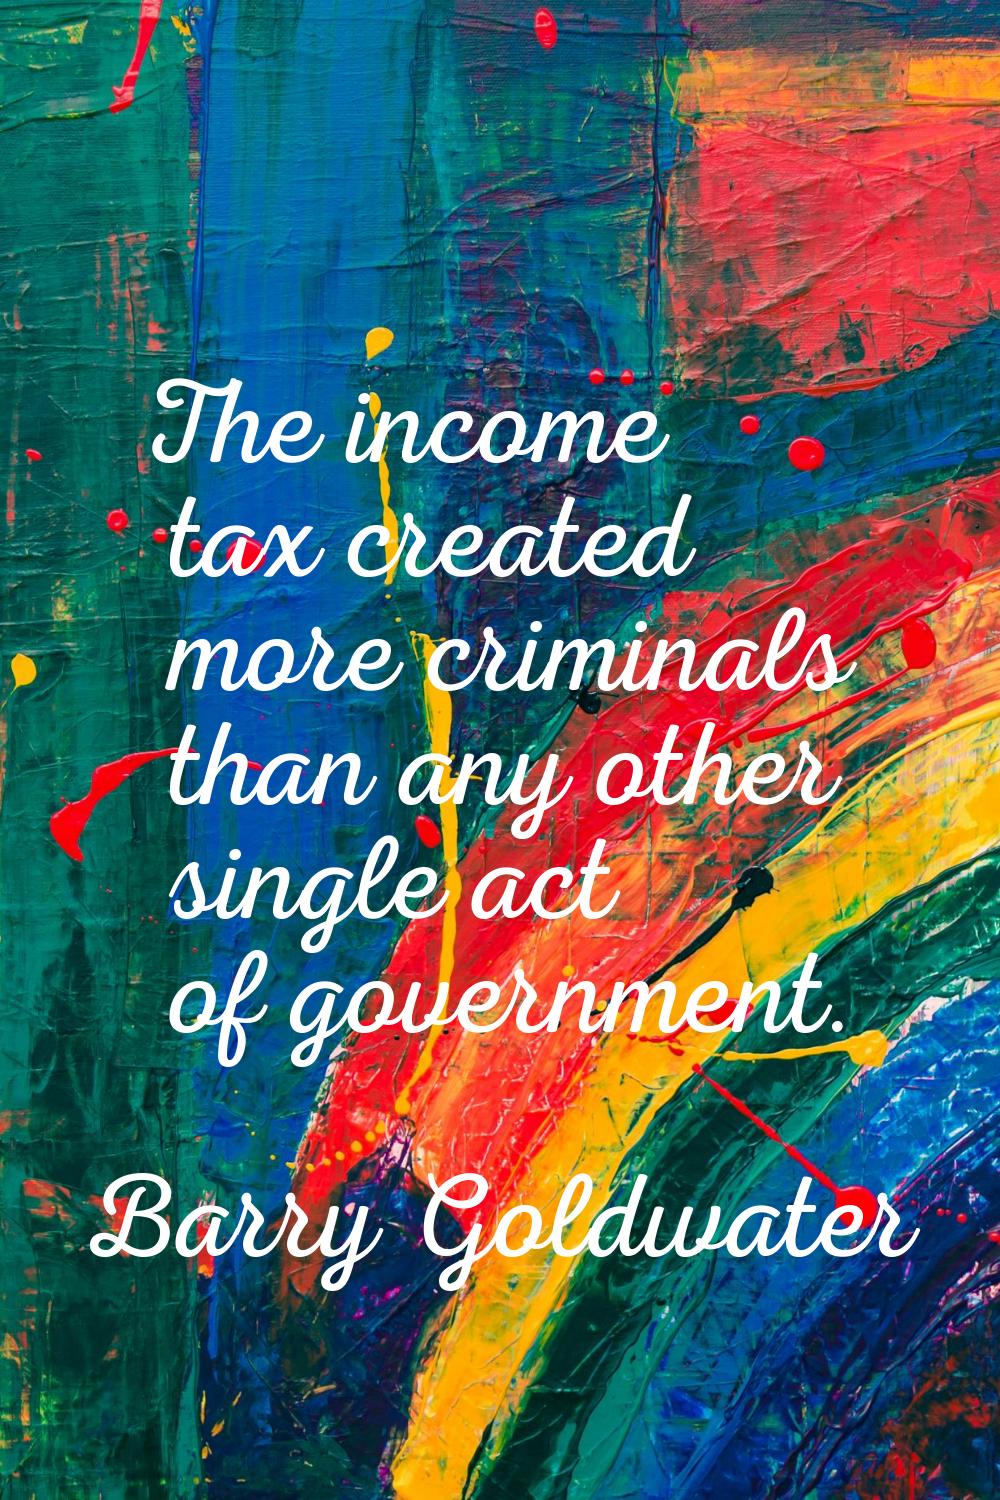 The income tax created more criminals than any other single act of government.